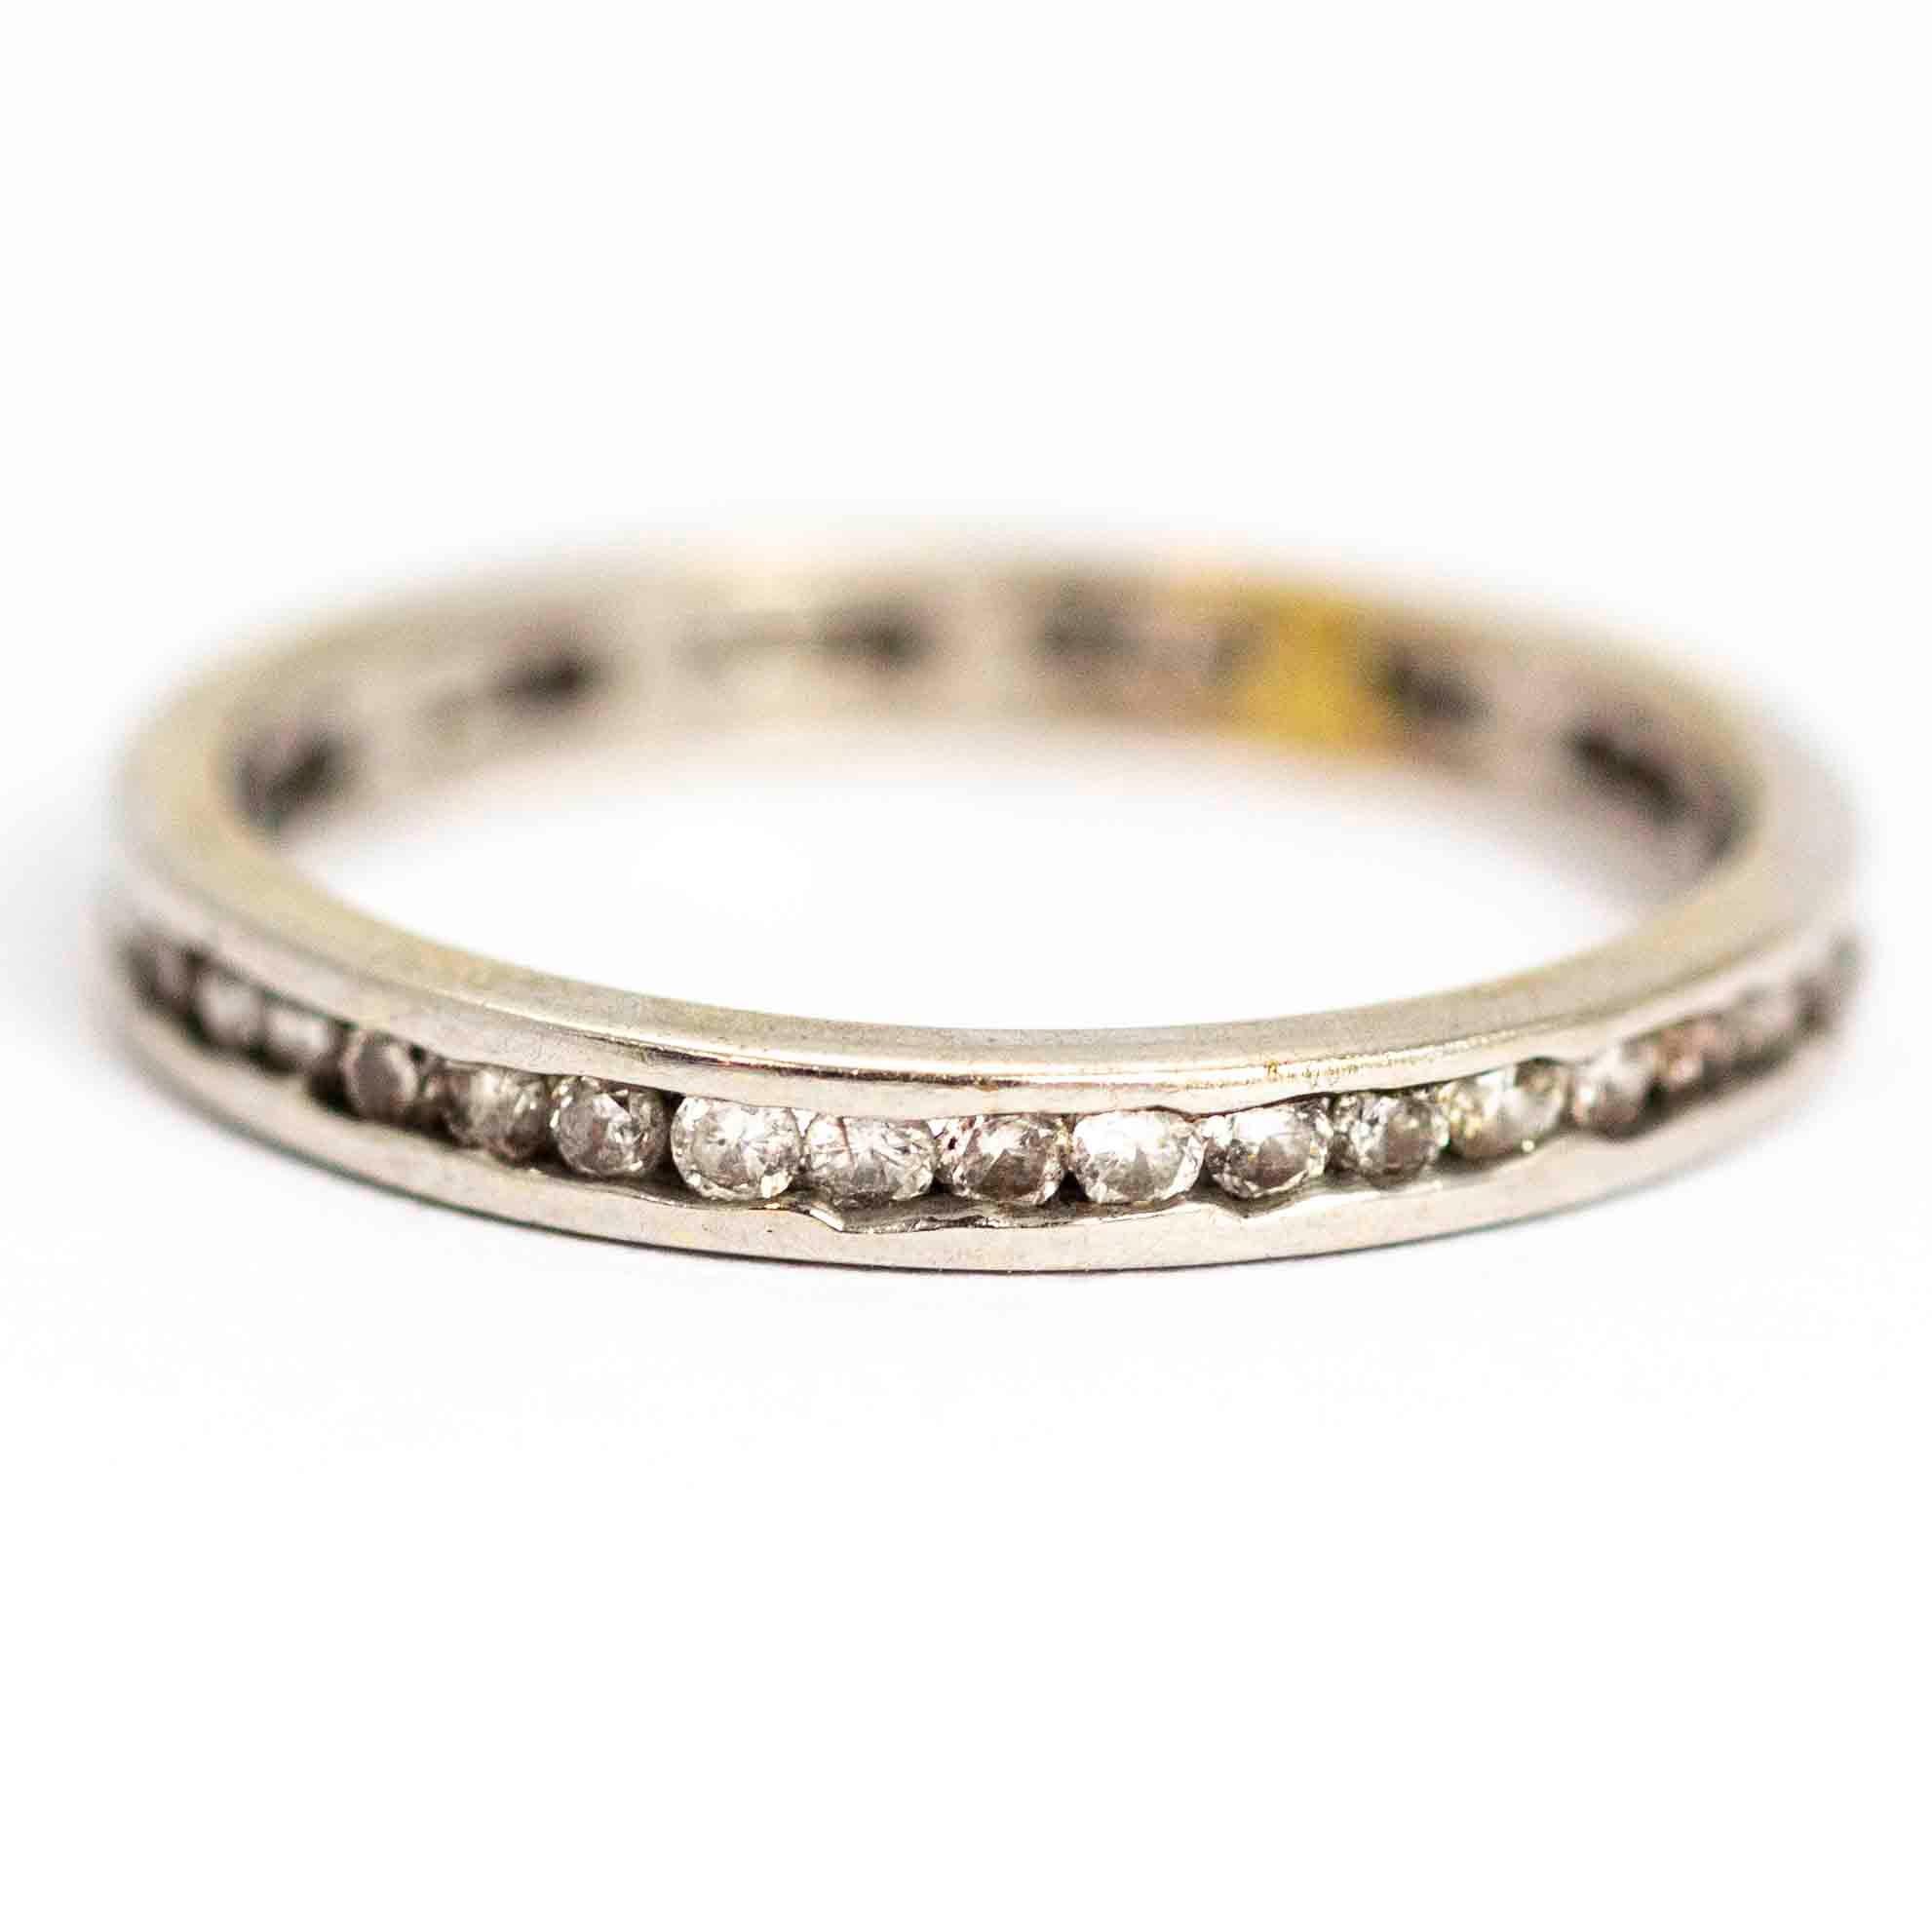 A superb vintage eternity band fully set with round white diamond. The stones are deep set between the edges of the ring. Modelled in 14 carat white gold.

Ring Size: UK N, US 7

Band Width: 2.55mm

Depth to Finger: 1.42mm